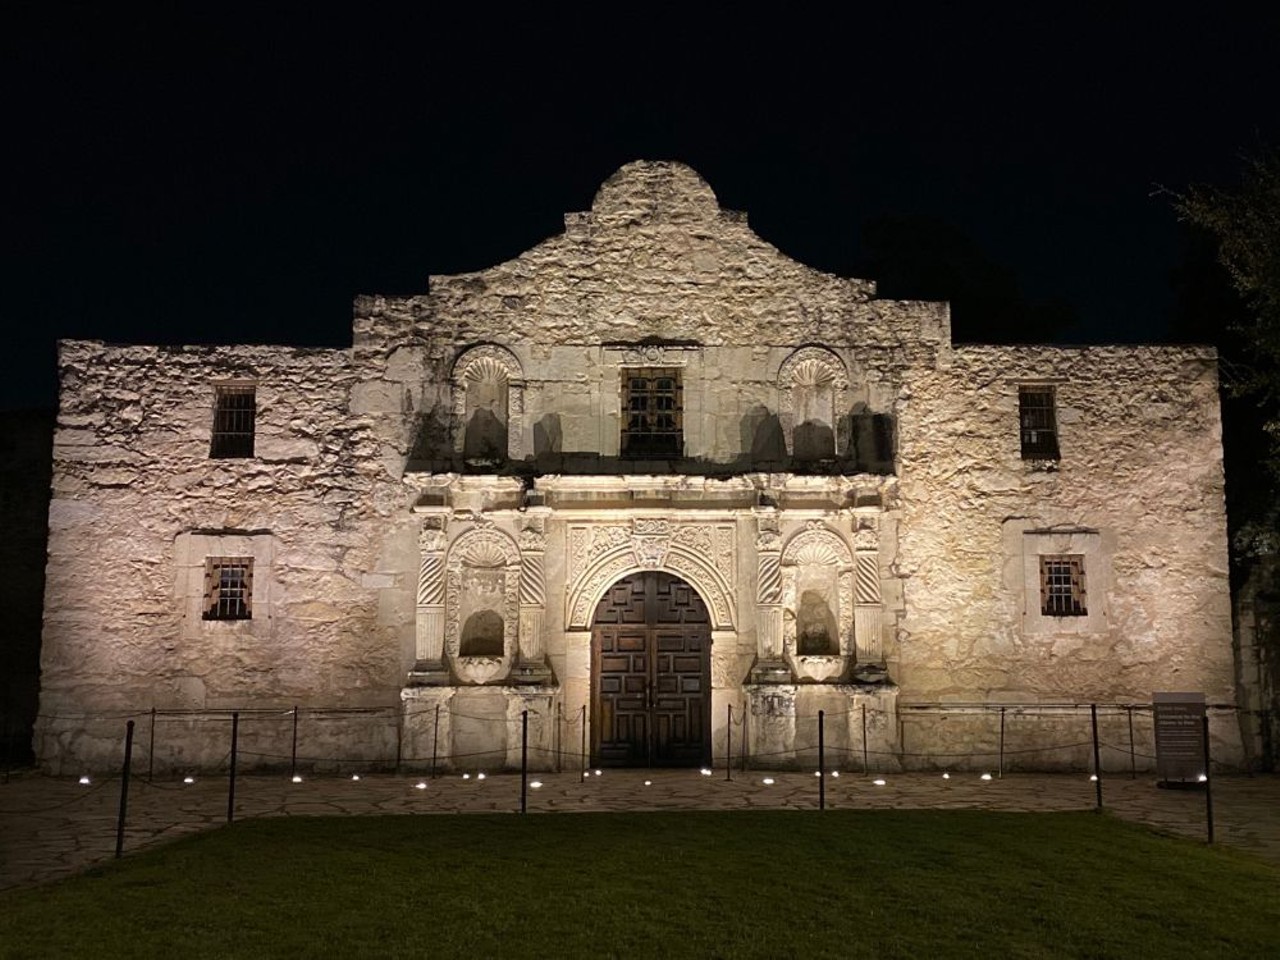 Take a late-night ghost tour
The best way to learn about all of San Antonio’s spookiest history and happenings is to do it after dark. Ghost City Tours, RJA Ghost Tours and Sisters Grimm Ghost Tours all offer haunted evening jaunts in the Alamo City.